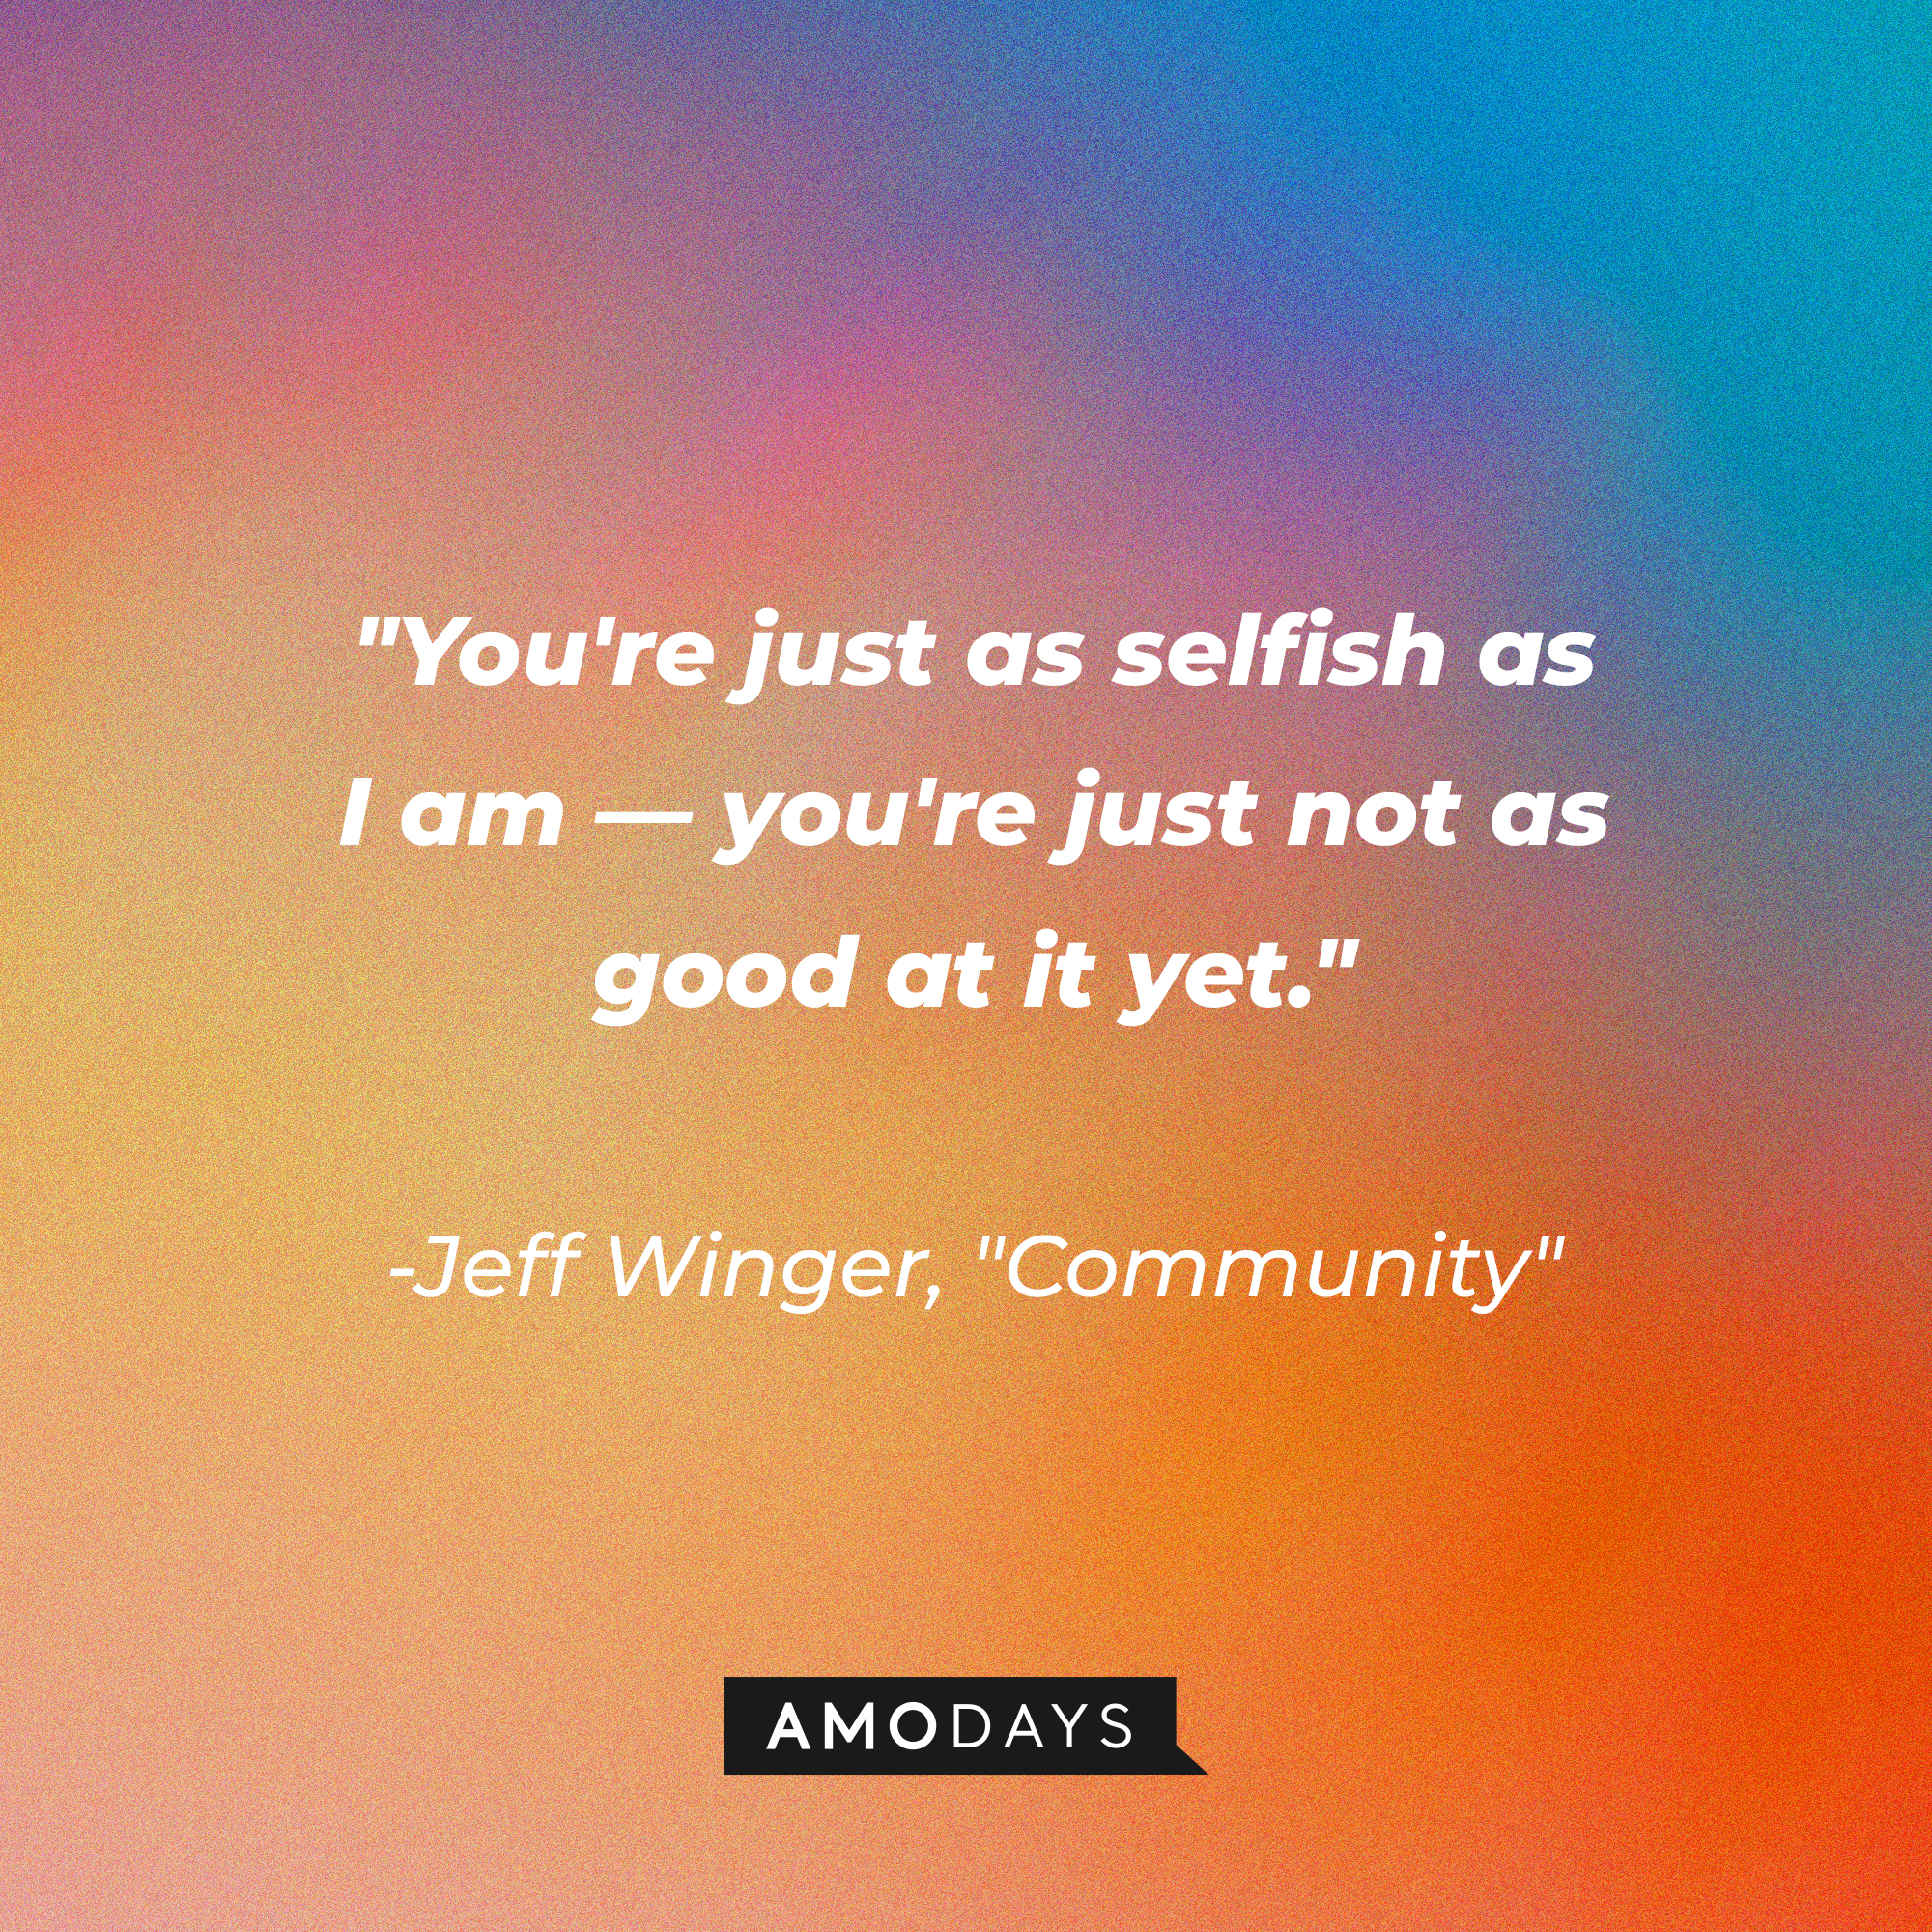 Jeff Winger's quote: "You're just as selfish as I am―you're just not as good at it yet." | Source: Amodays